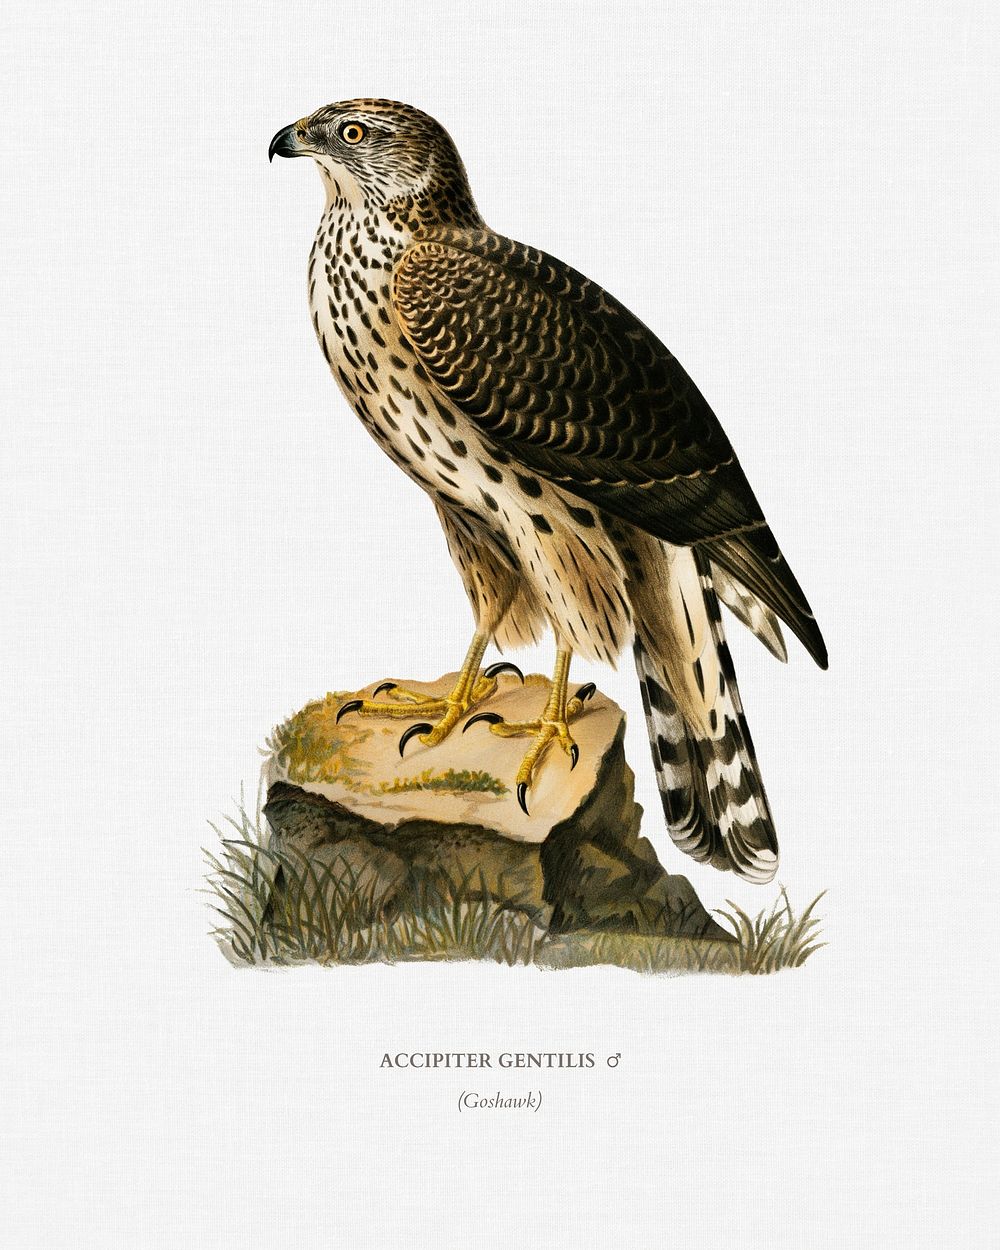 Goshawk (Accipiter gentilis) illustrated by the von Wright brothers. Digitally enhanced from our own 1929 folio version of…